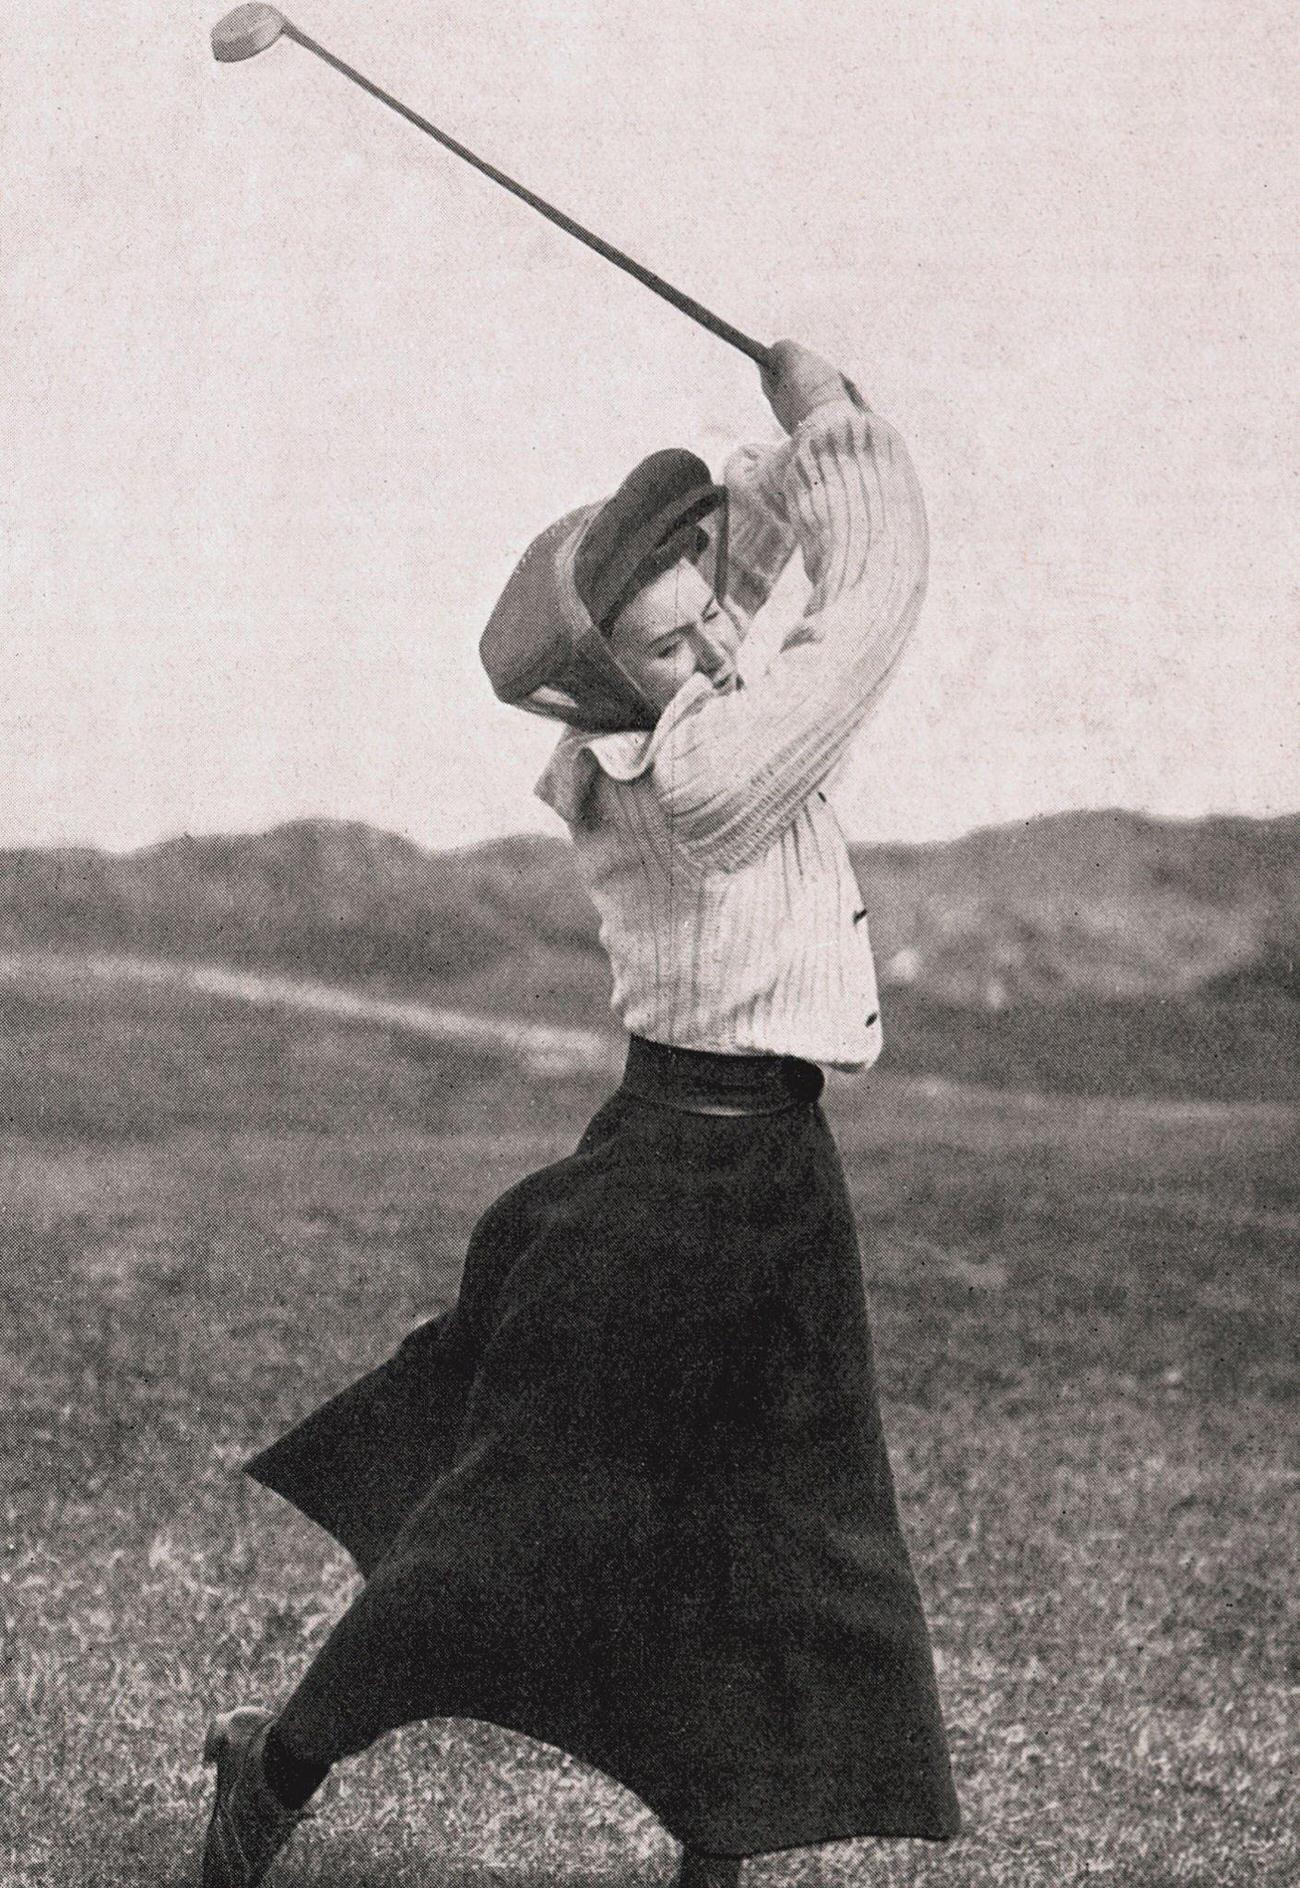 Miss May Hezlet teeing off, 1908.